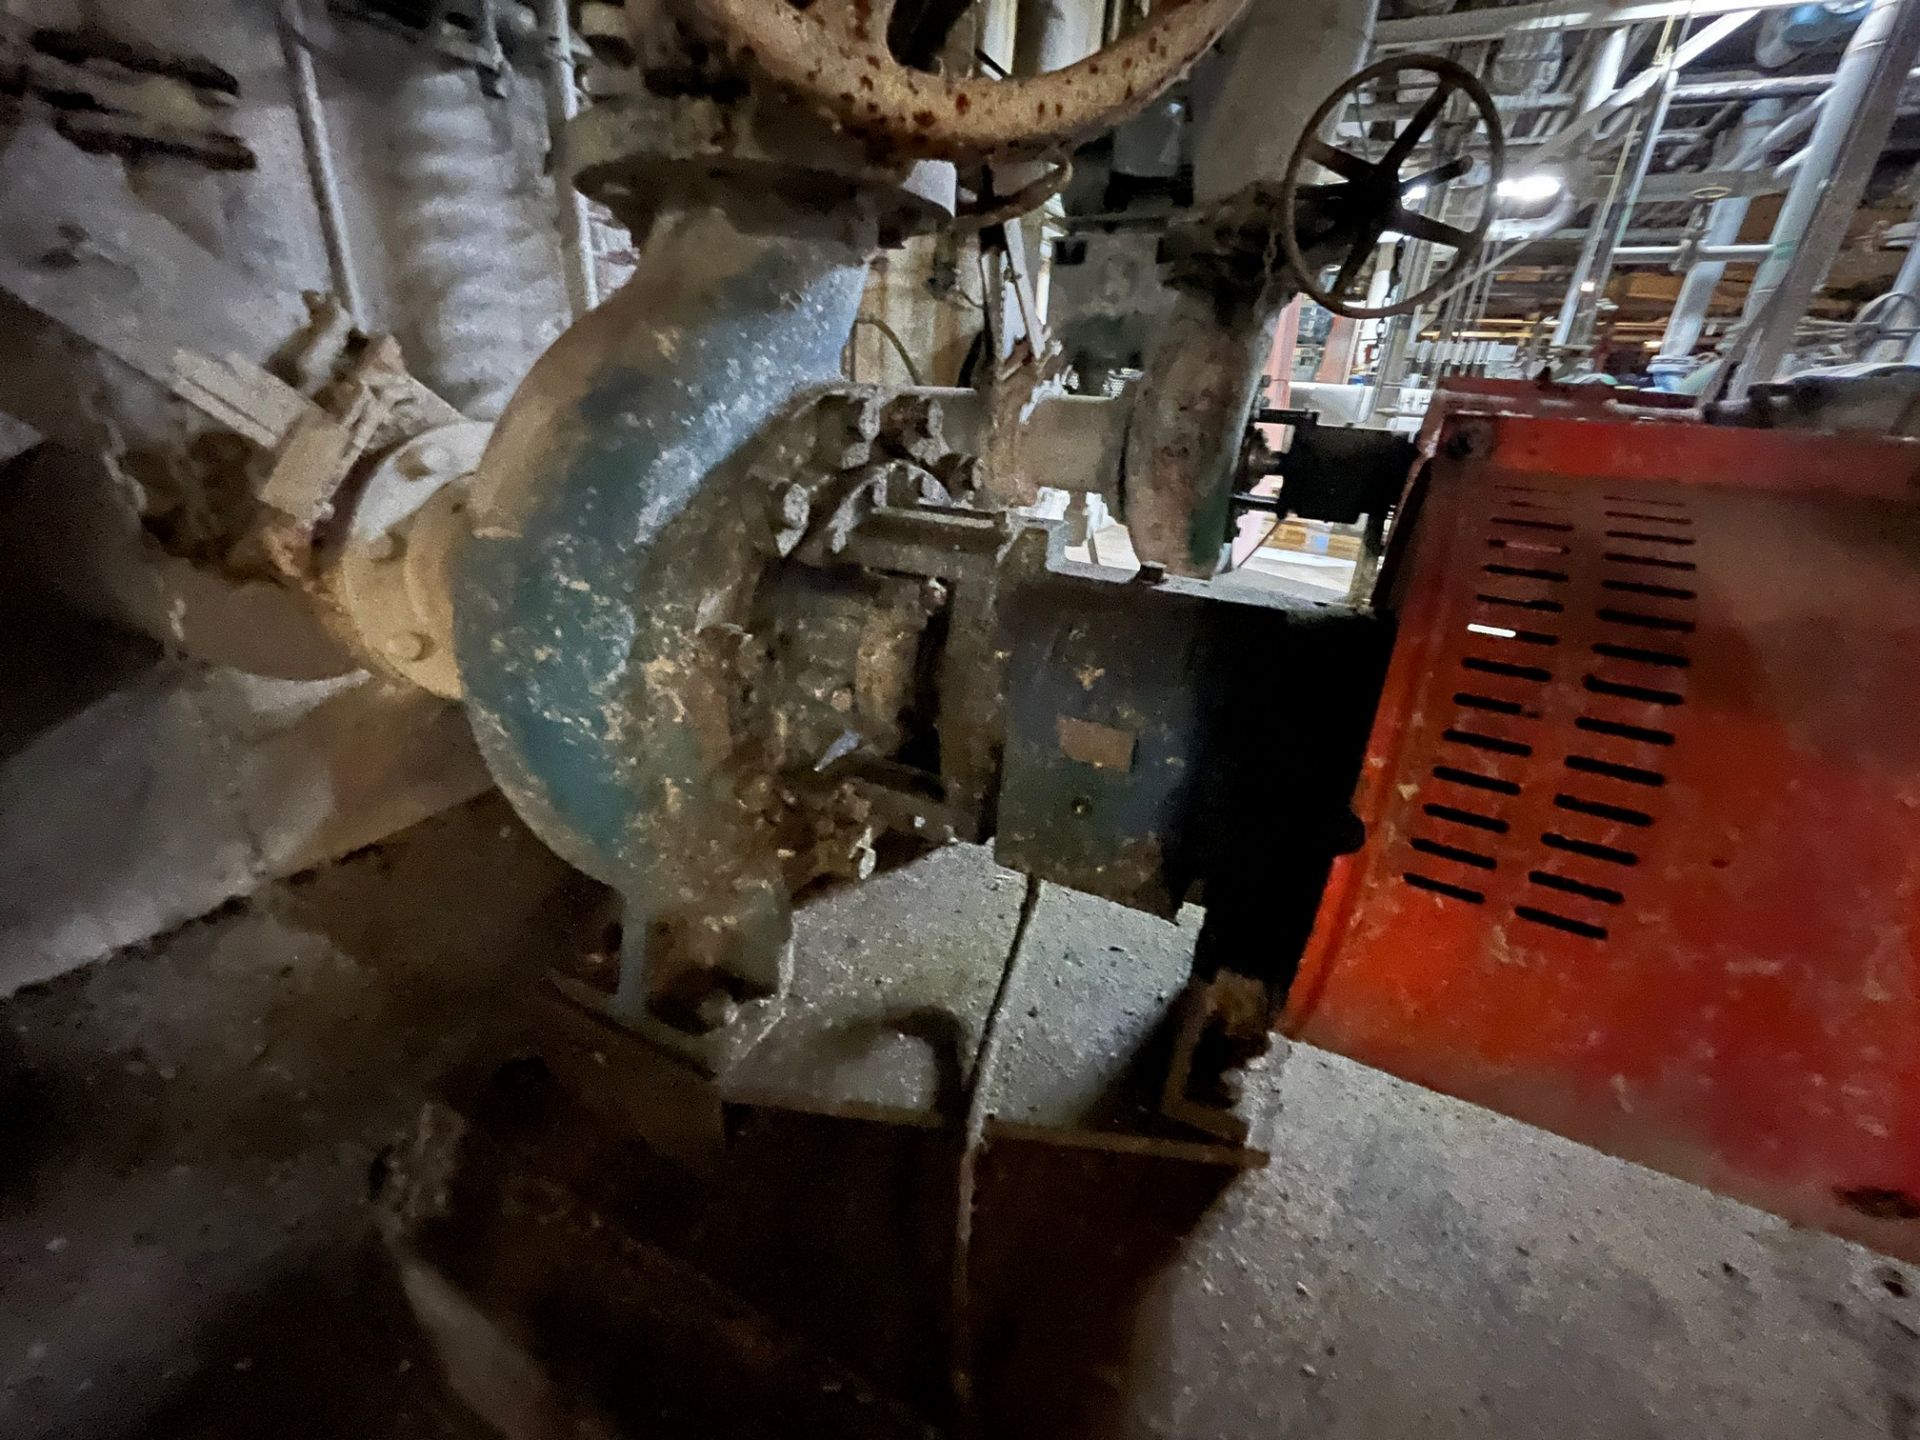 GOULDS 3180 CENTRIFUGAL PUMP, SIZE 6X8-14 (DEINKING BUILDING, 1ST FLOOR) - Image 2 of 2